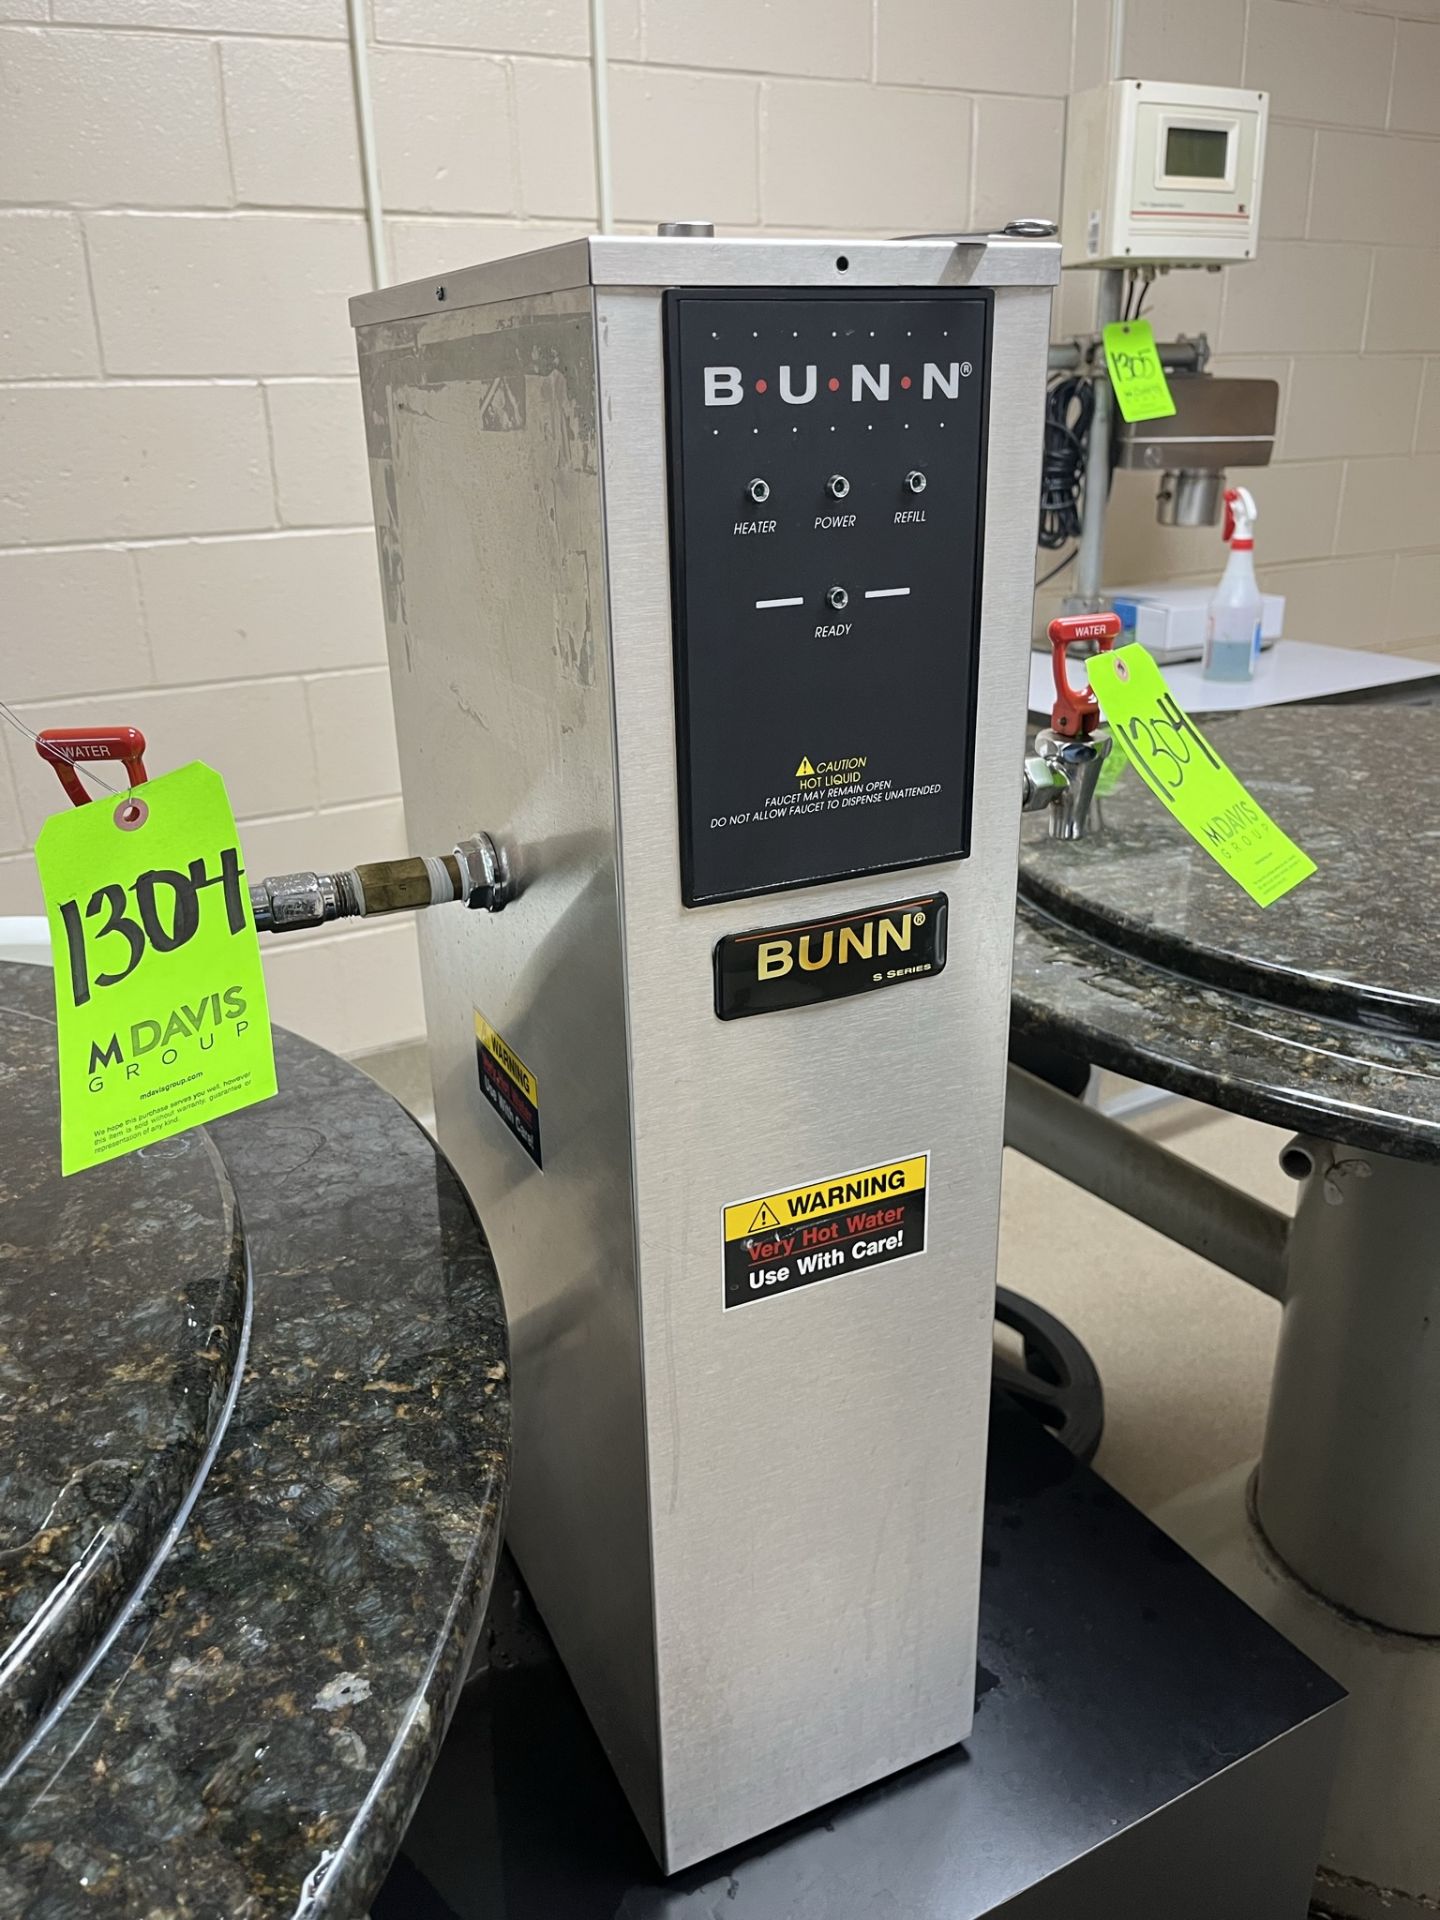 BUNN-H5X ELEMENT STAINLESS STEEL HOT WATER DISPENSER MODEL H5X #12500.0026 S/N EP00000006 P/N: - Image 4 of 6